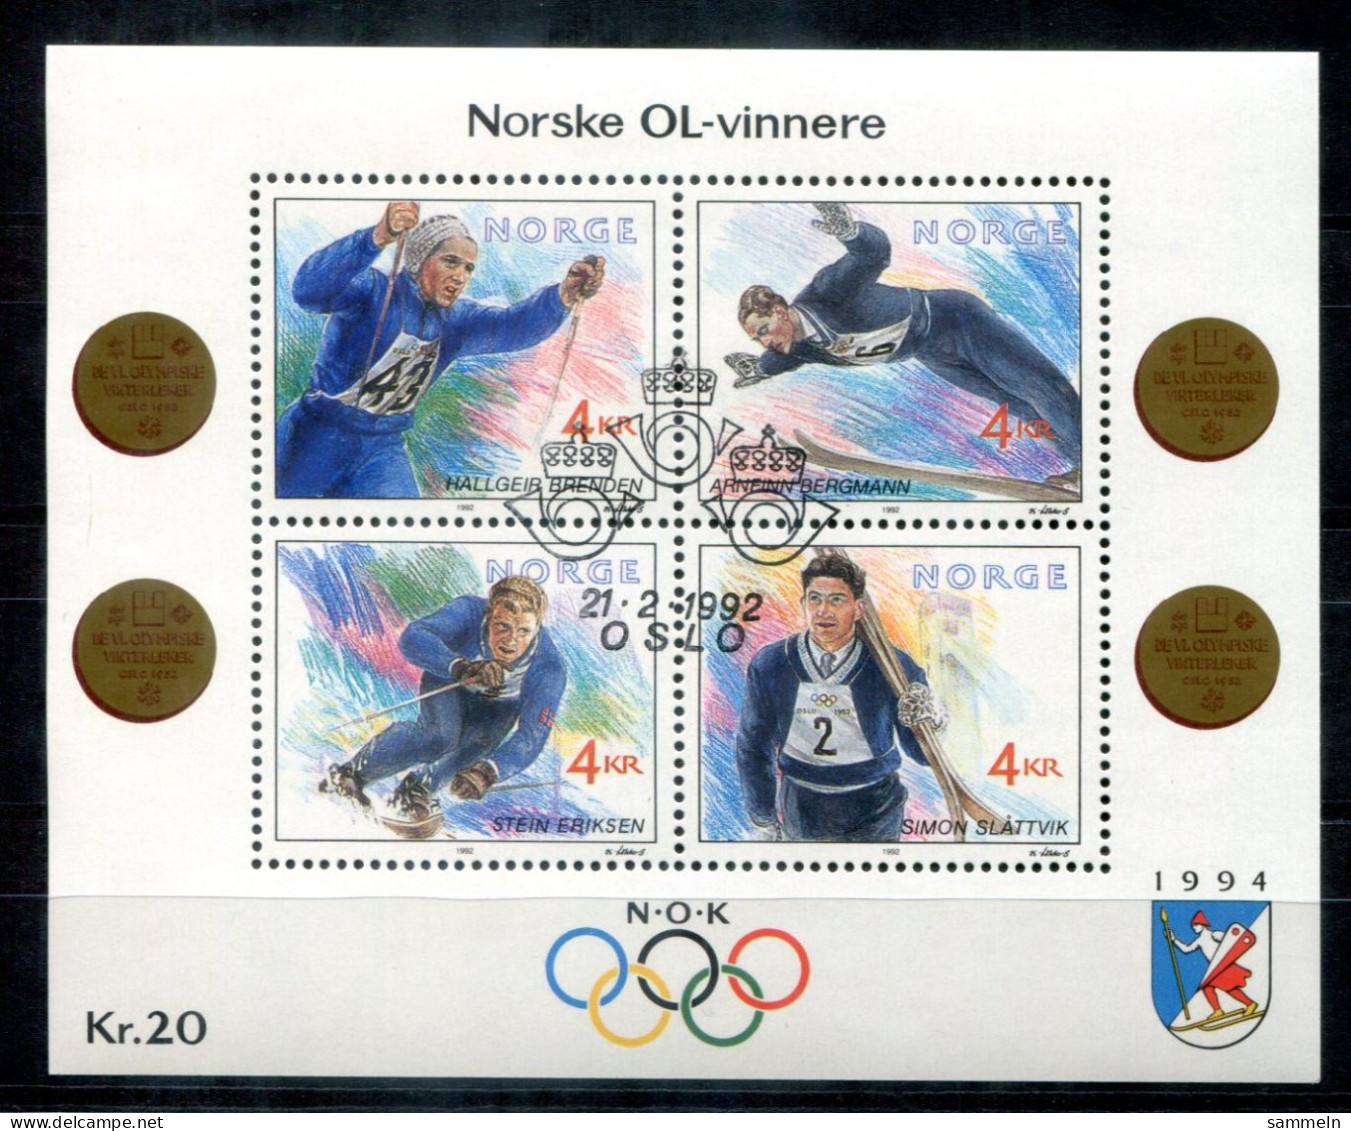 NORWEGEN - Block 17, Bl.17 Canc. - Olympiasieger, Olympic Champions Olympique - NORWAY / NORVÈGE - Blocs-feuillets